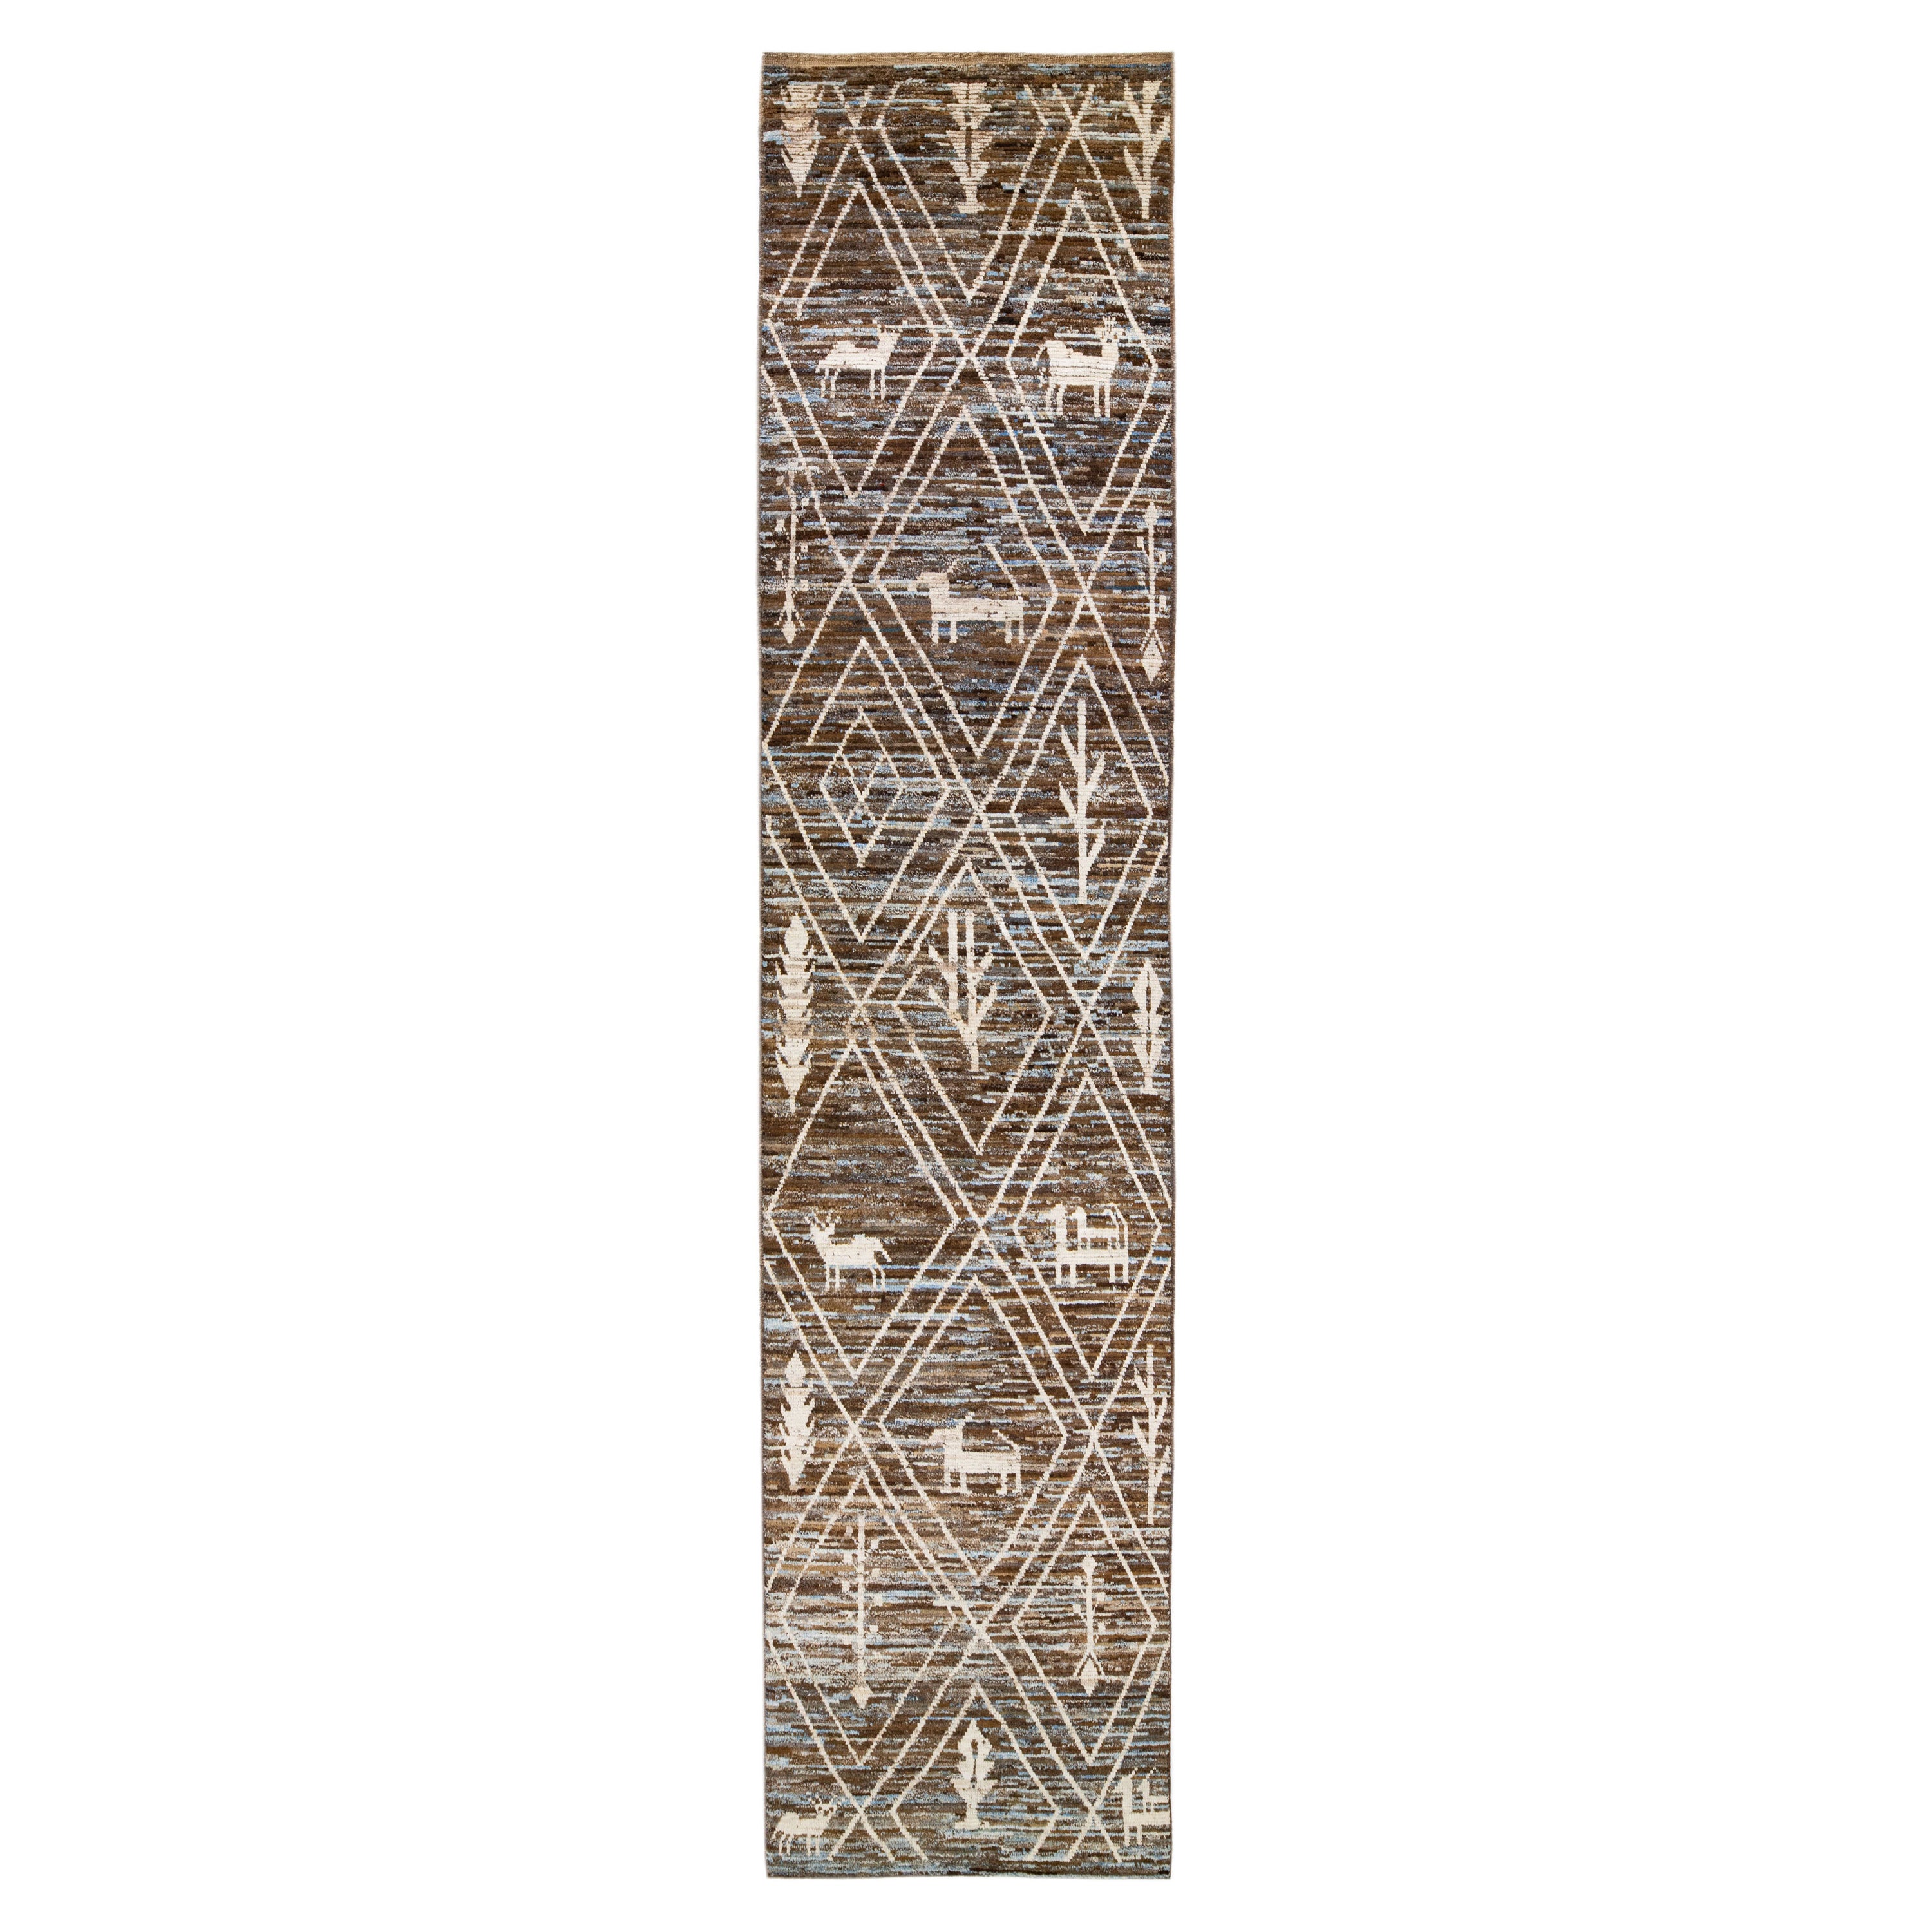 Modern Moroccan Style Handmade Brown Wool Runner with Tribal Pattern